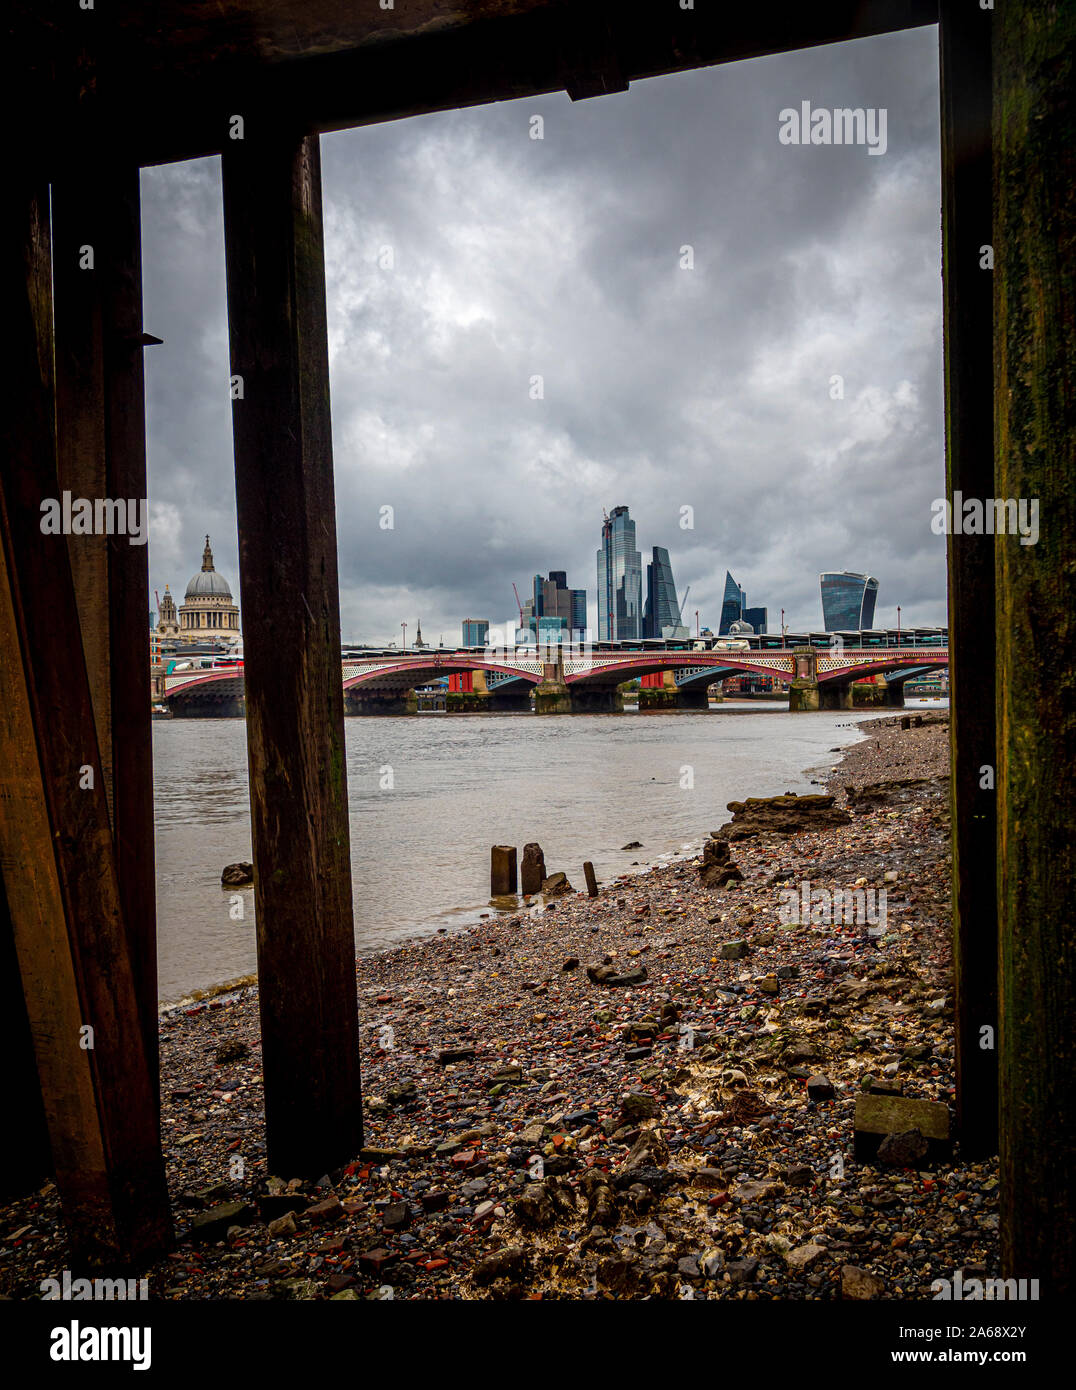 View under jetty at Oxo Tower Wharf towards St Pauls Cathedral and financial district of London, UK. Stock Photo